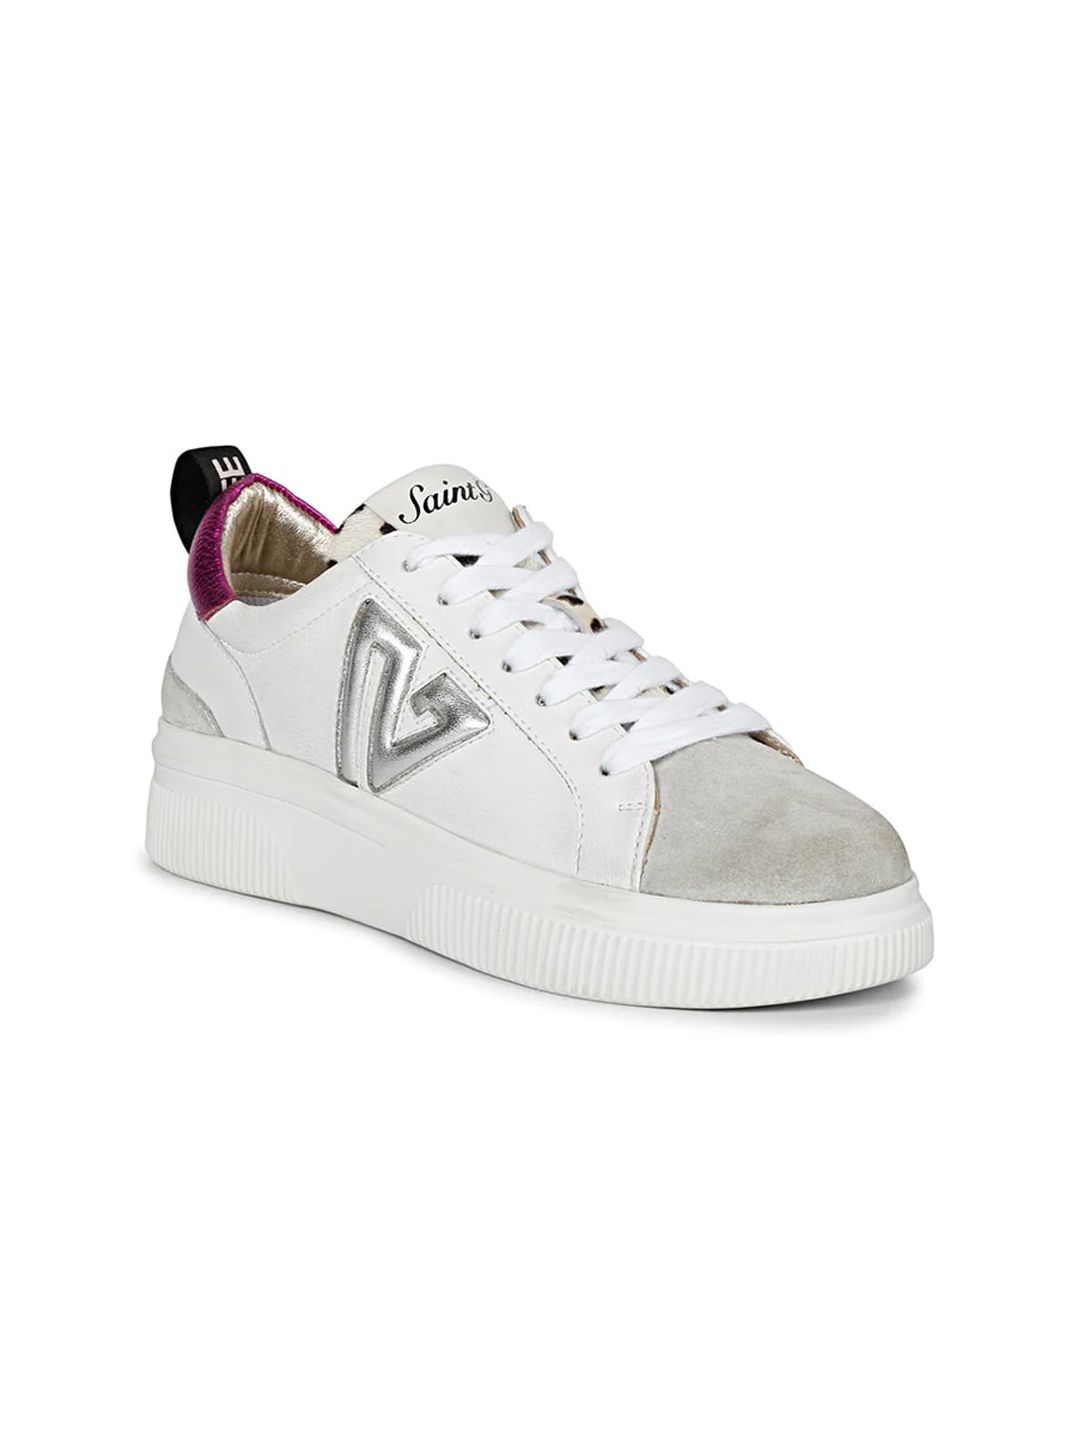 Saint G Women Colourblocked Leather Sneakers Price in India